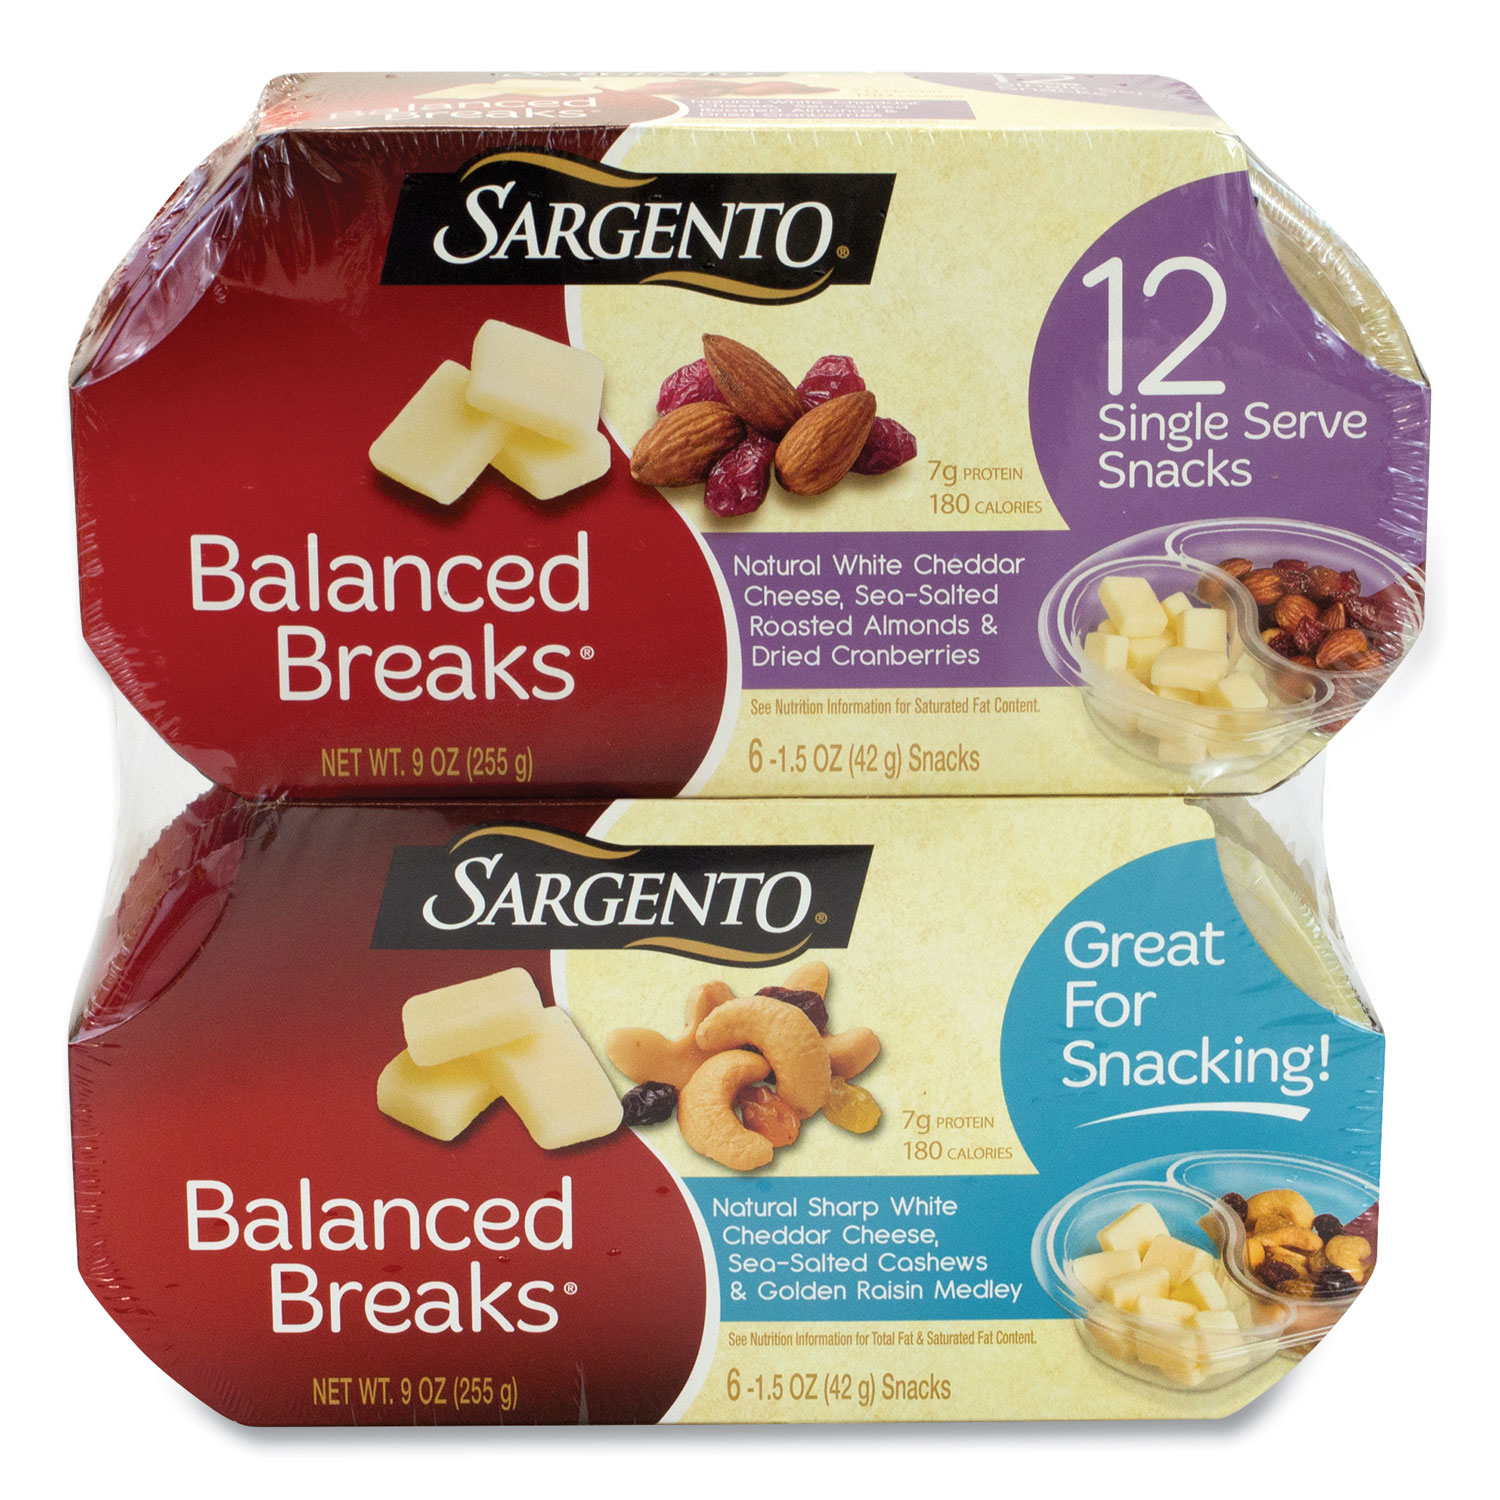  Sargento 928805 Balanced Breaks, Two Assorted Flavor Packs, 1.5 oz Pack, 12 Packs/Box, Free Delivery in 1-4 Business Days (GRR90200006) 